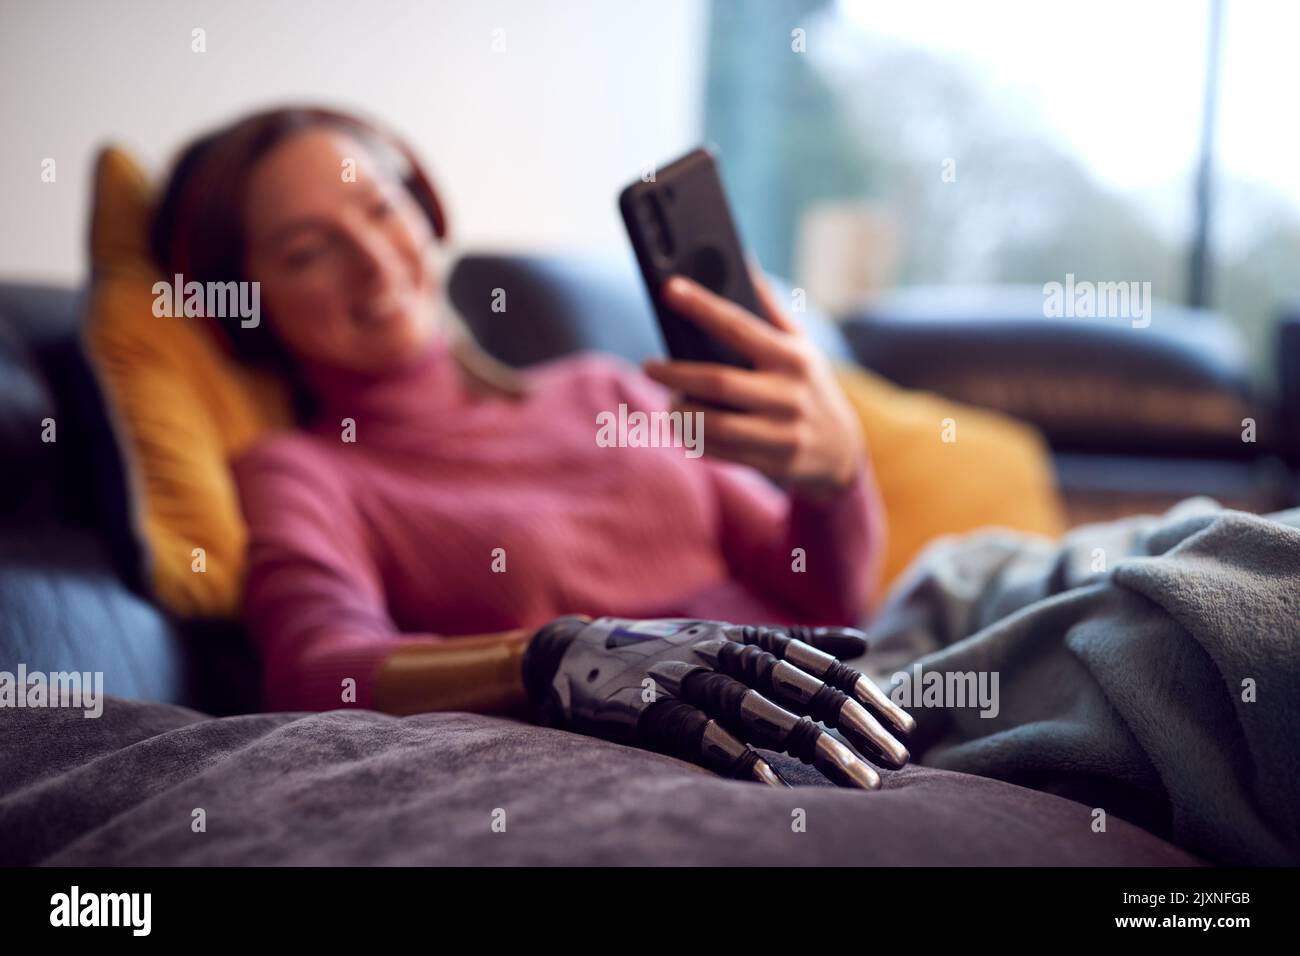 Woman With Prosthetic Arm Wearing Wireless Headphones Listening To Music On Mobile Phone On Sofa Stock Photo